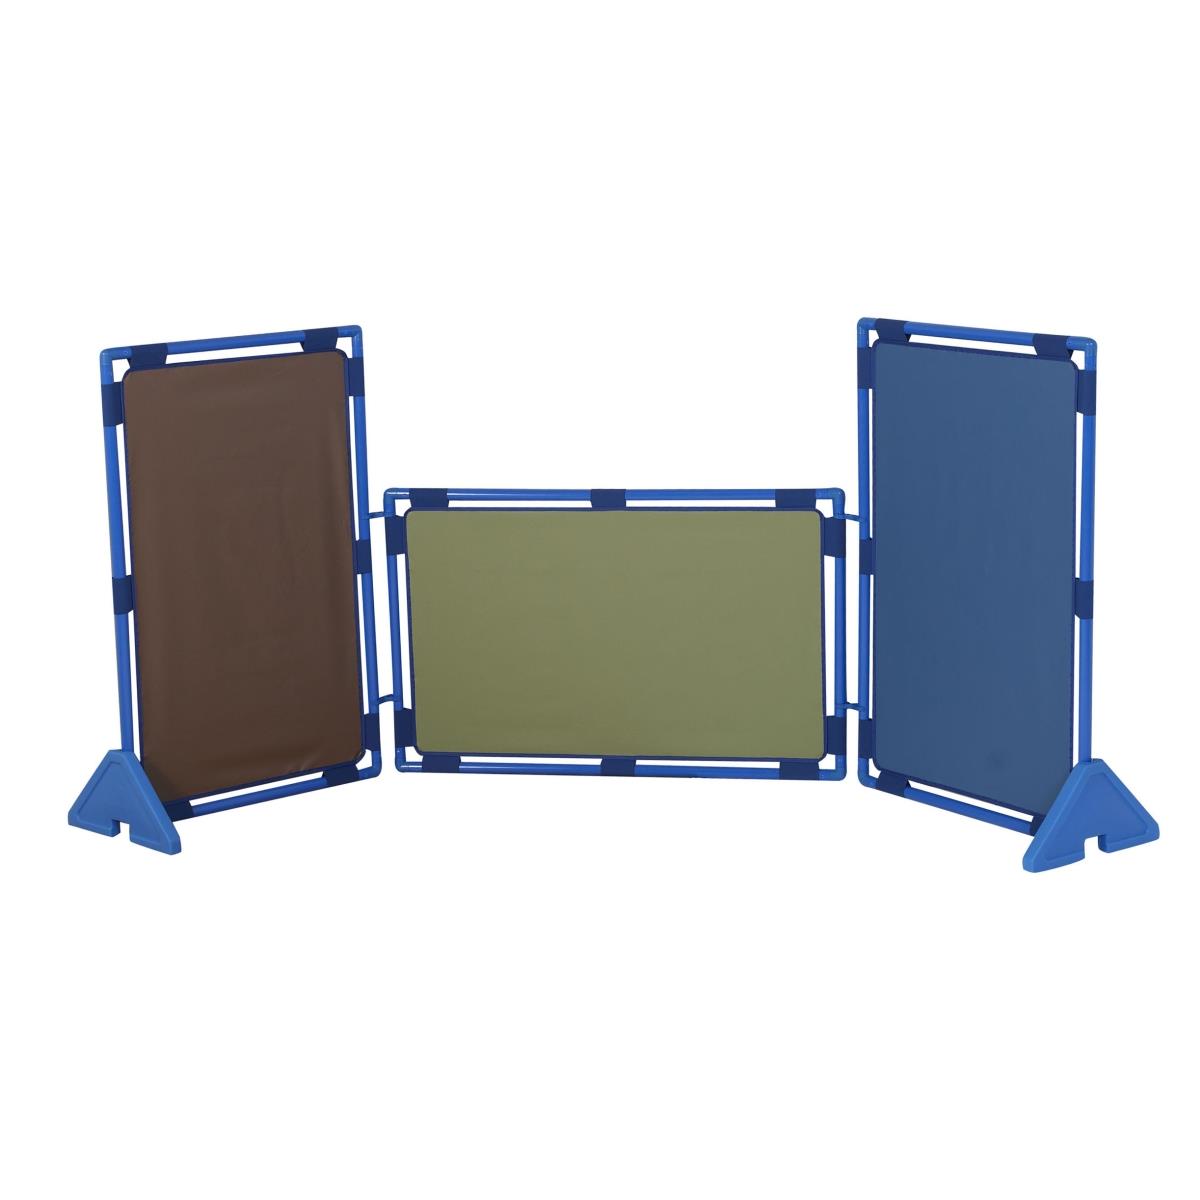 Picture of Childrens Factory CF900-922 Rectangles Cozy Woodland PlayPanels - Set of 3